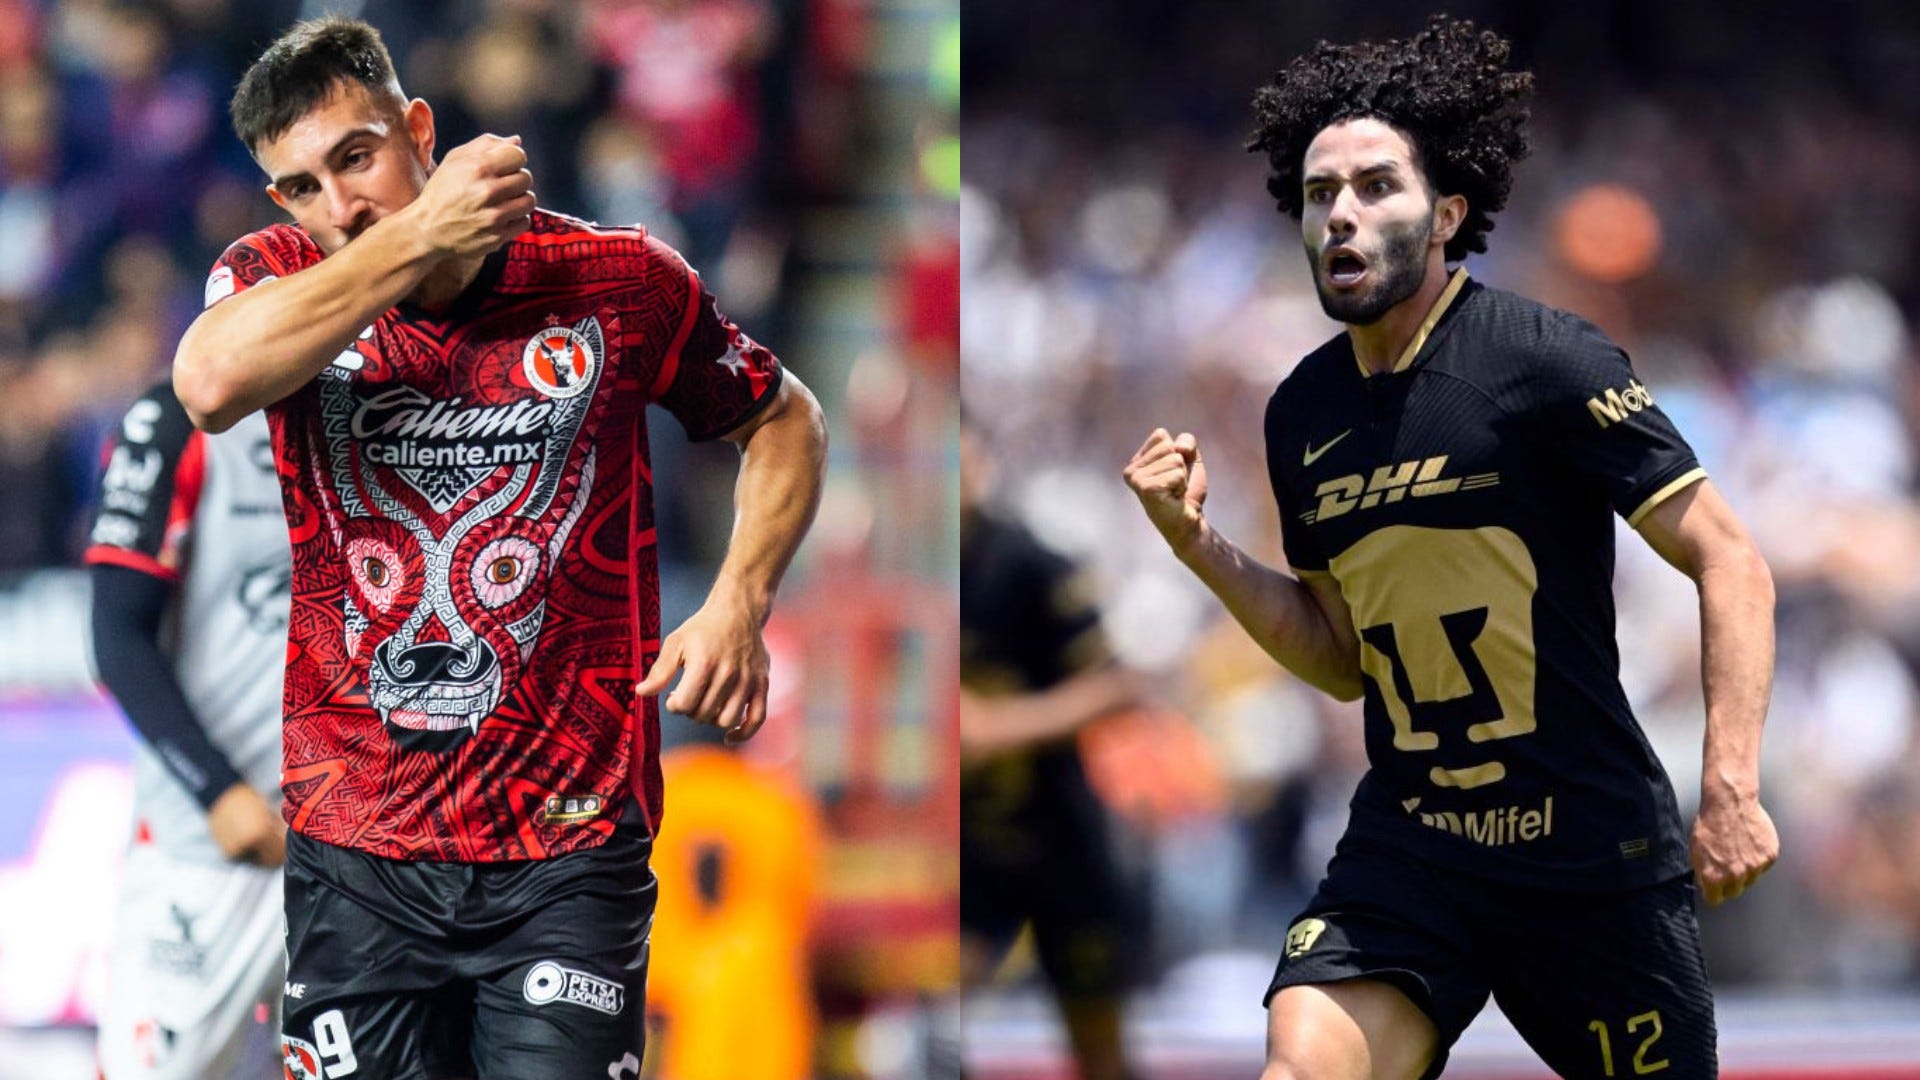 Tijuana vs Pumas Live stream, TV channel, kick-off time and where to watch Goal US